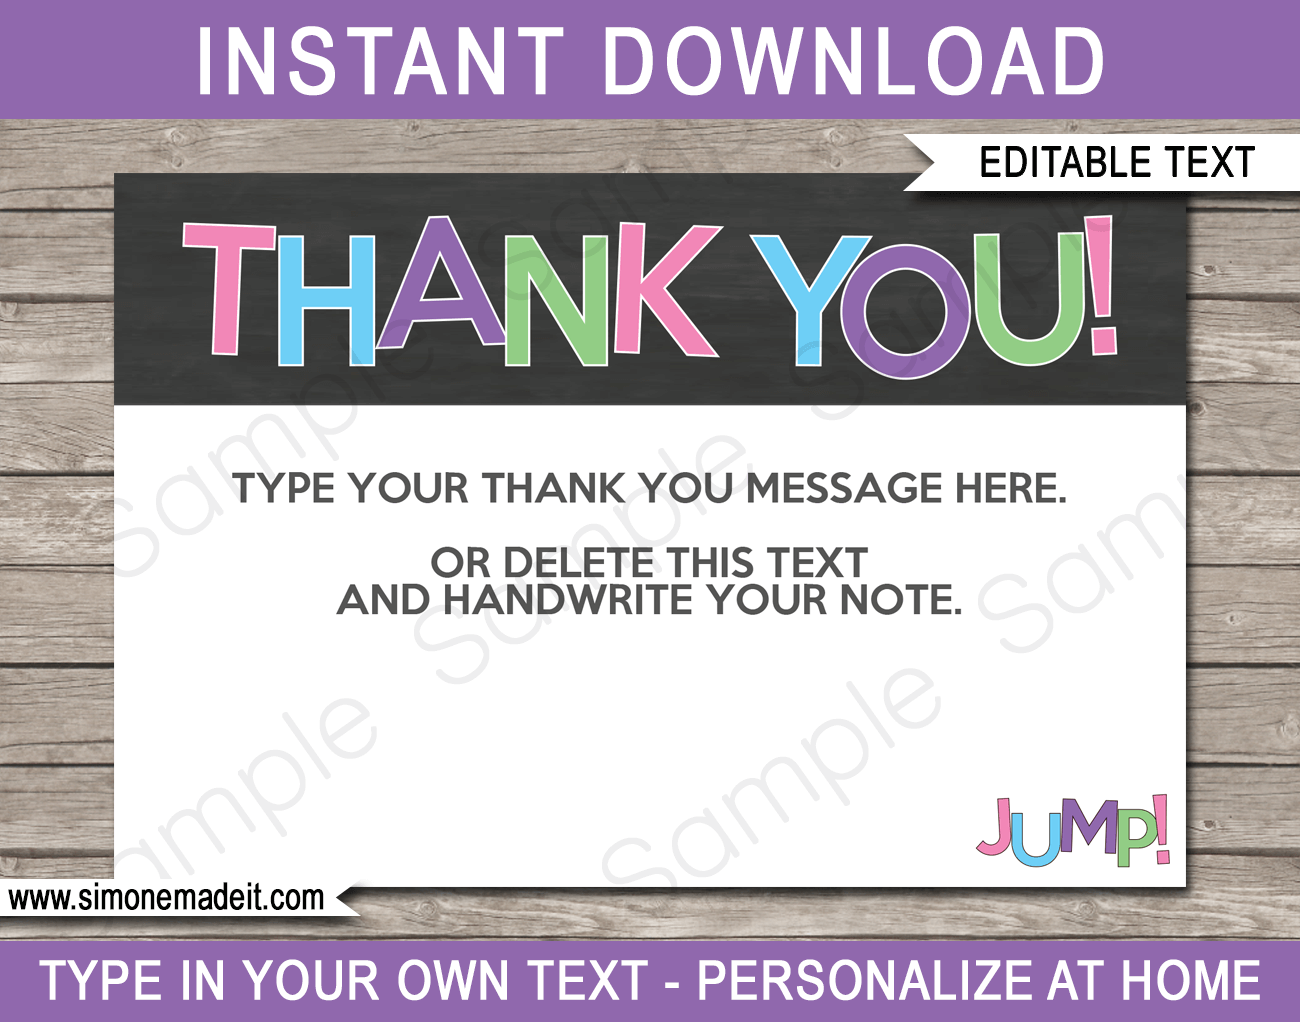 Girls Trampoline Party Thank You Cards - editable & printable template - Trampoline Birthday Party theme - Jump - Instant Download via simonemadeit.com